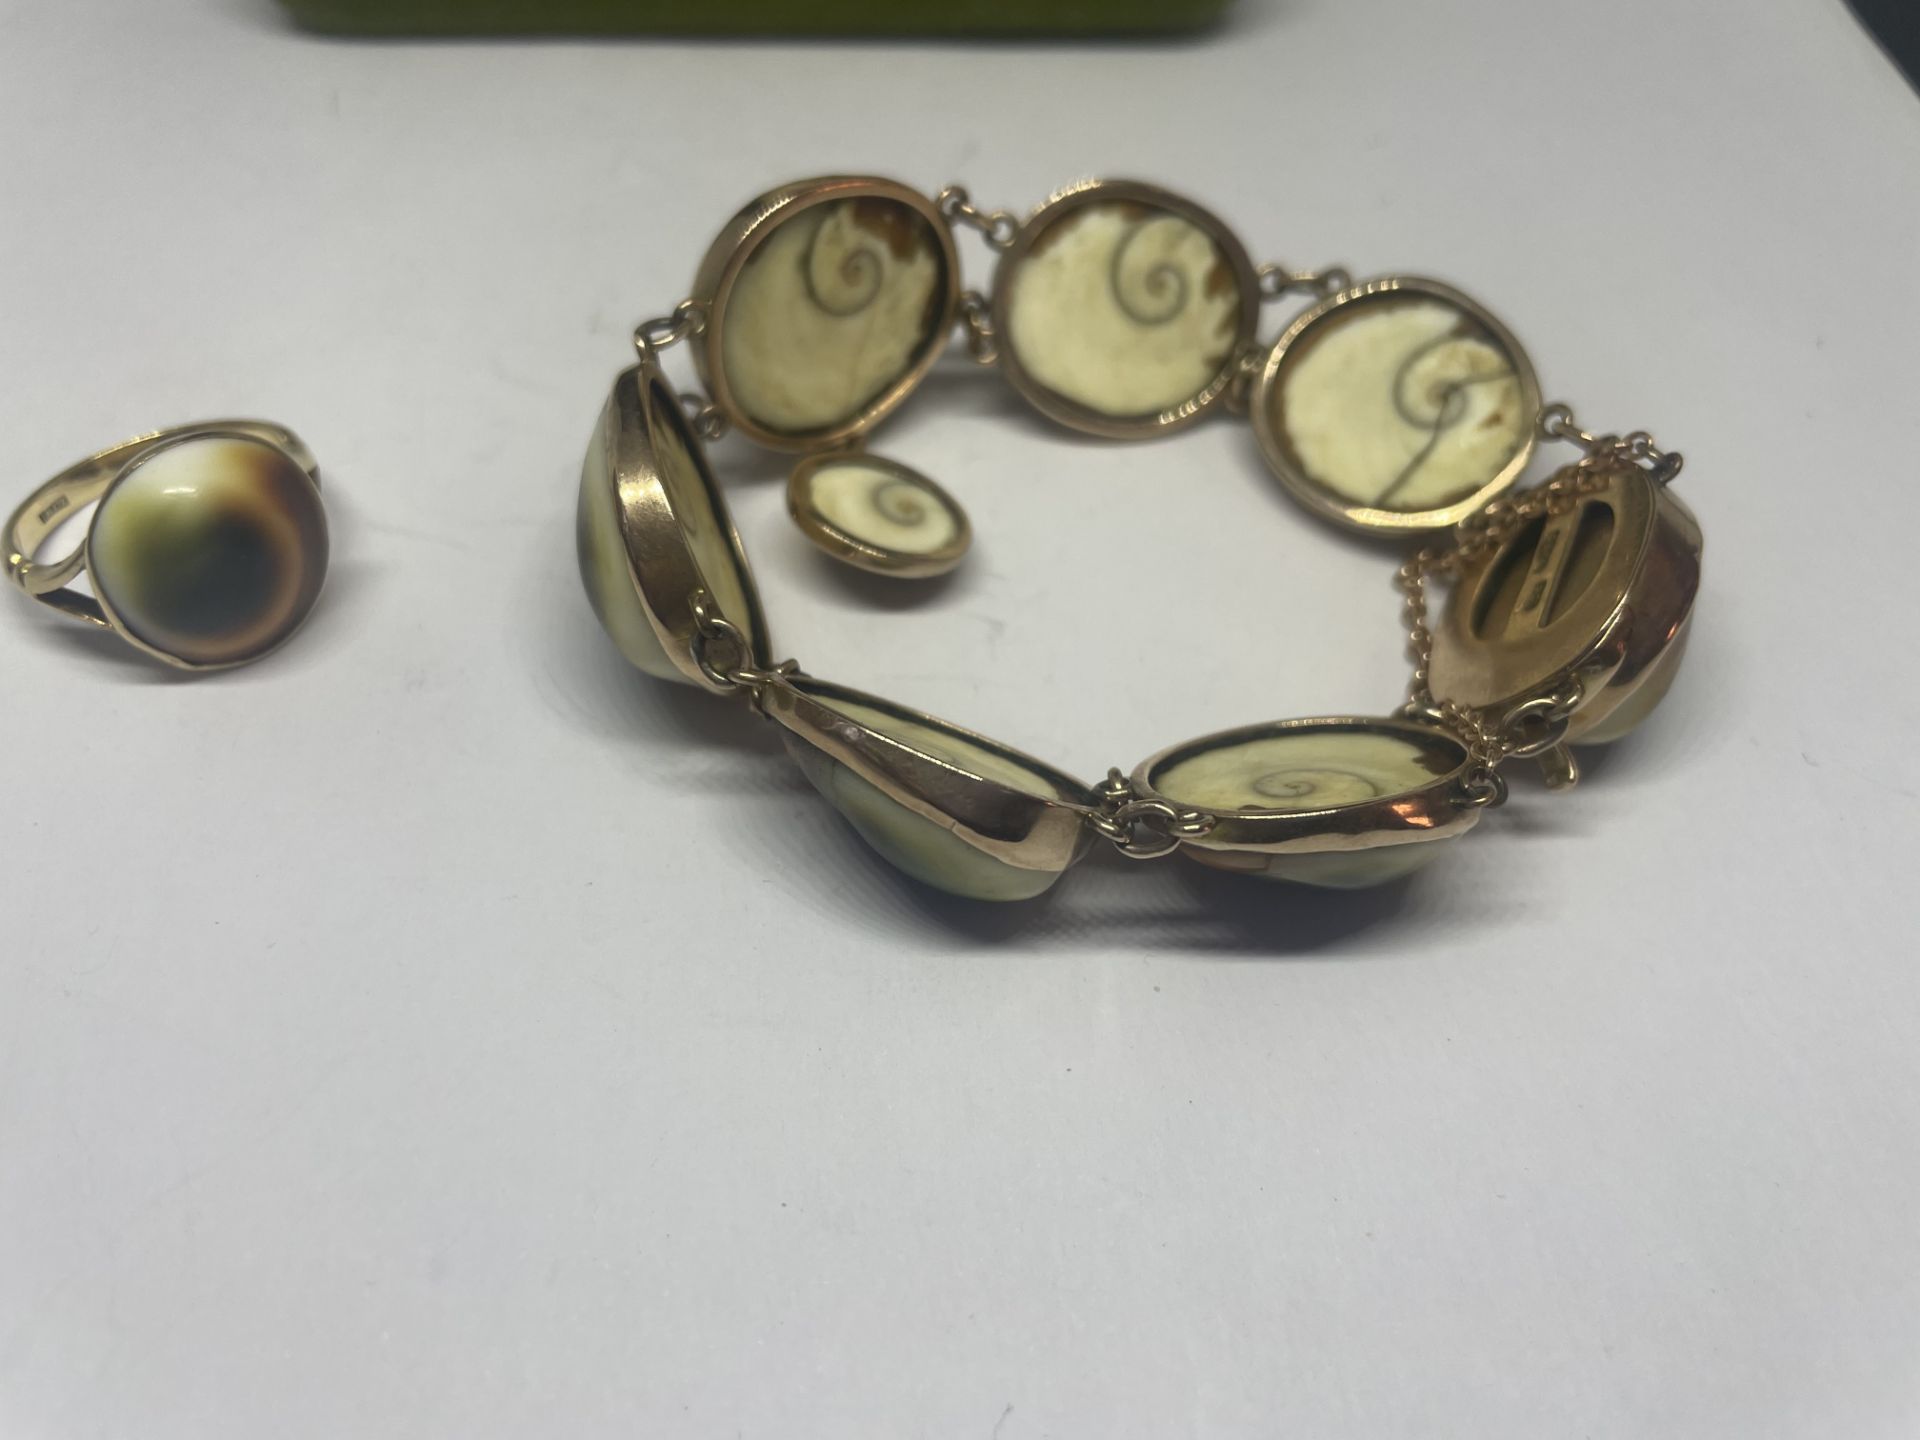 A 9 CARAT GOLD BRACELET WITH OPERCULUL SHELLS AND A MATCHING RING IN A PRESENTATION BOX - Image 2 of 4